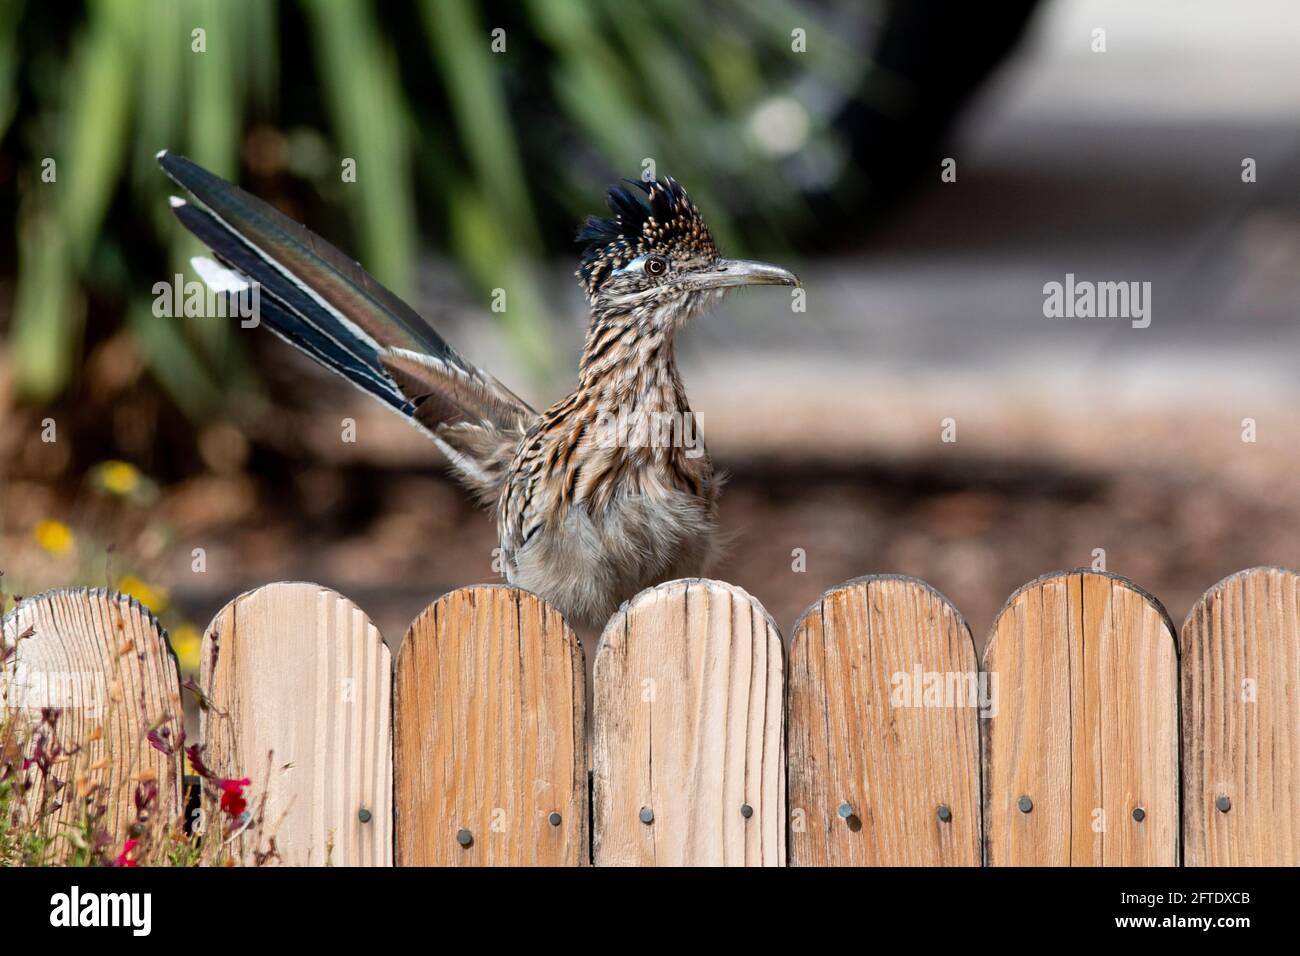 Greater Roadrunner, Geococcyx californianus, poses on residential fence around xerophytic landscaping in Albuquerque, New Mexico. Stock Photo